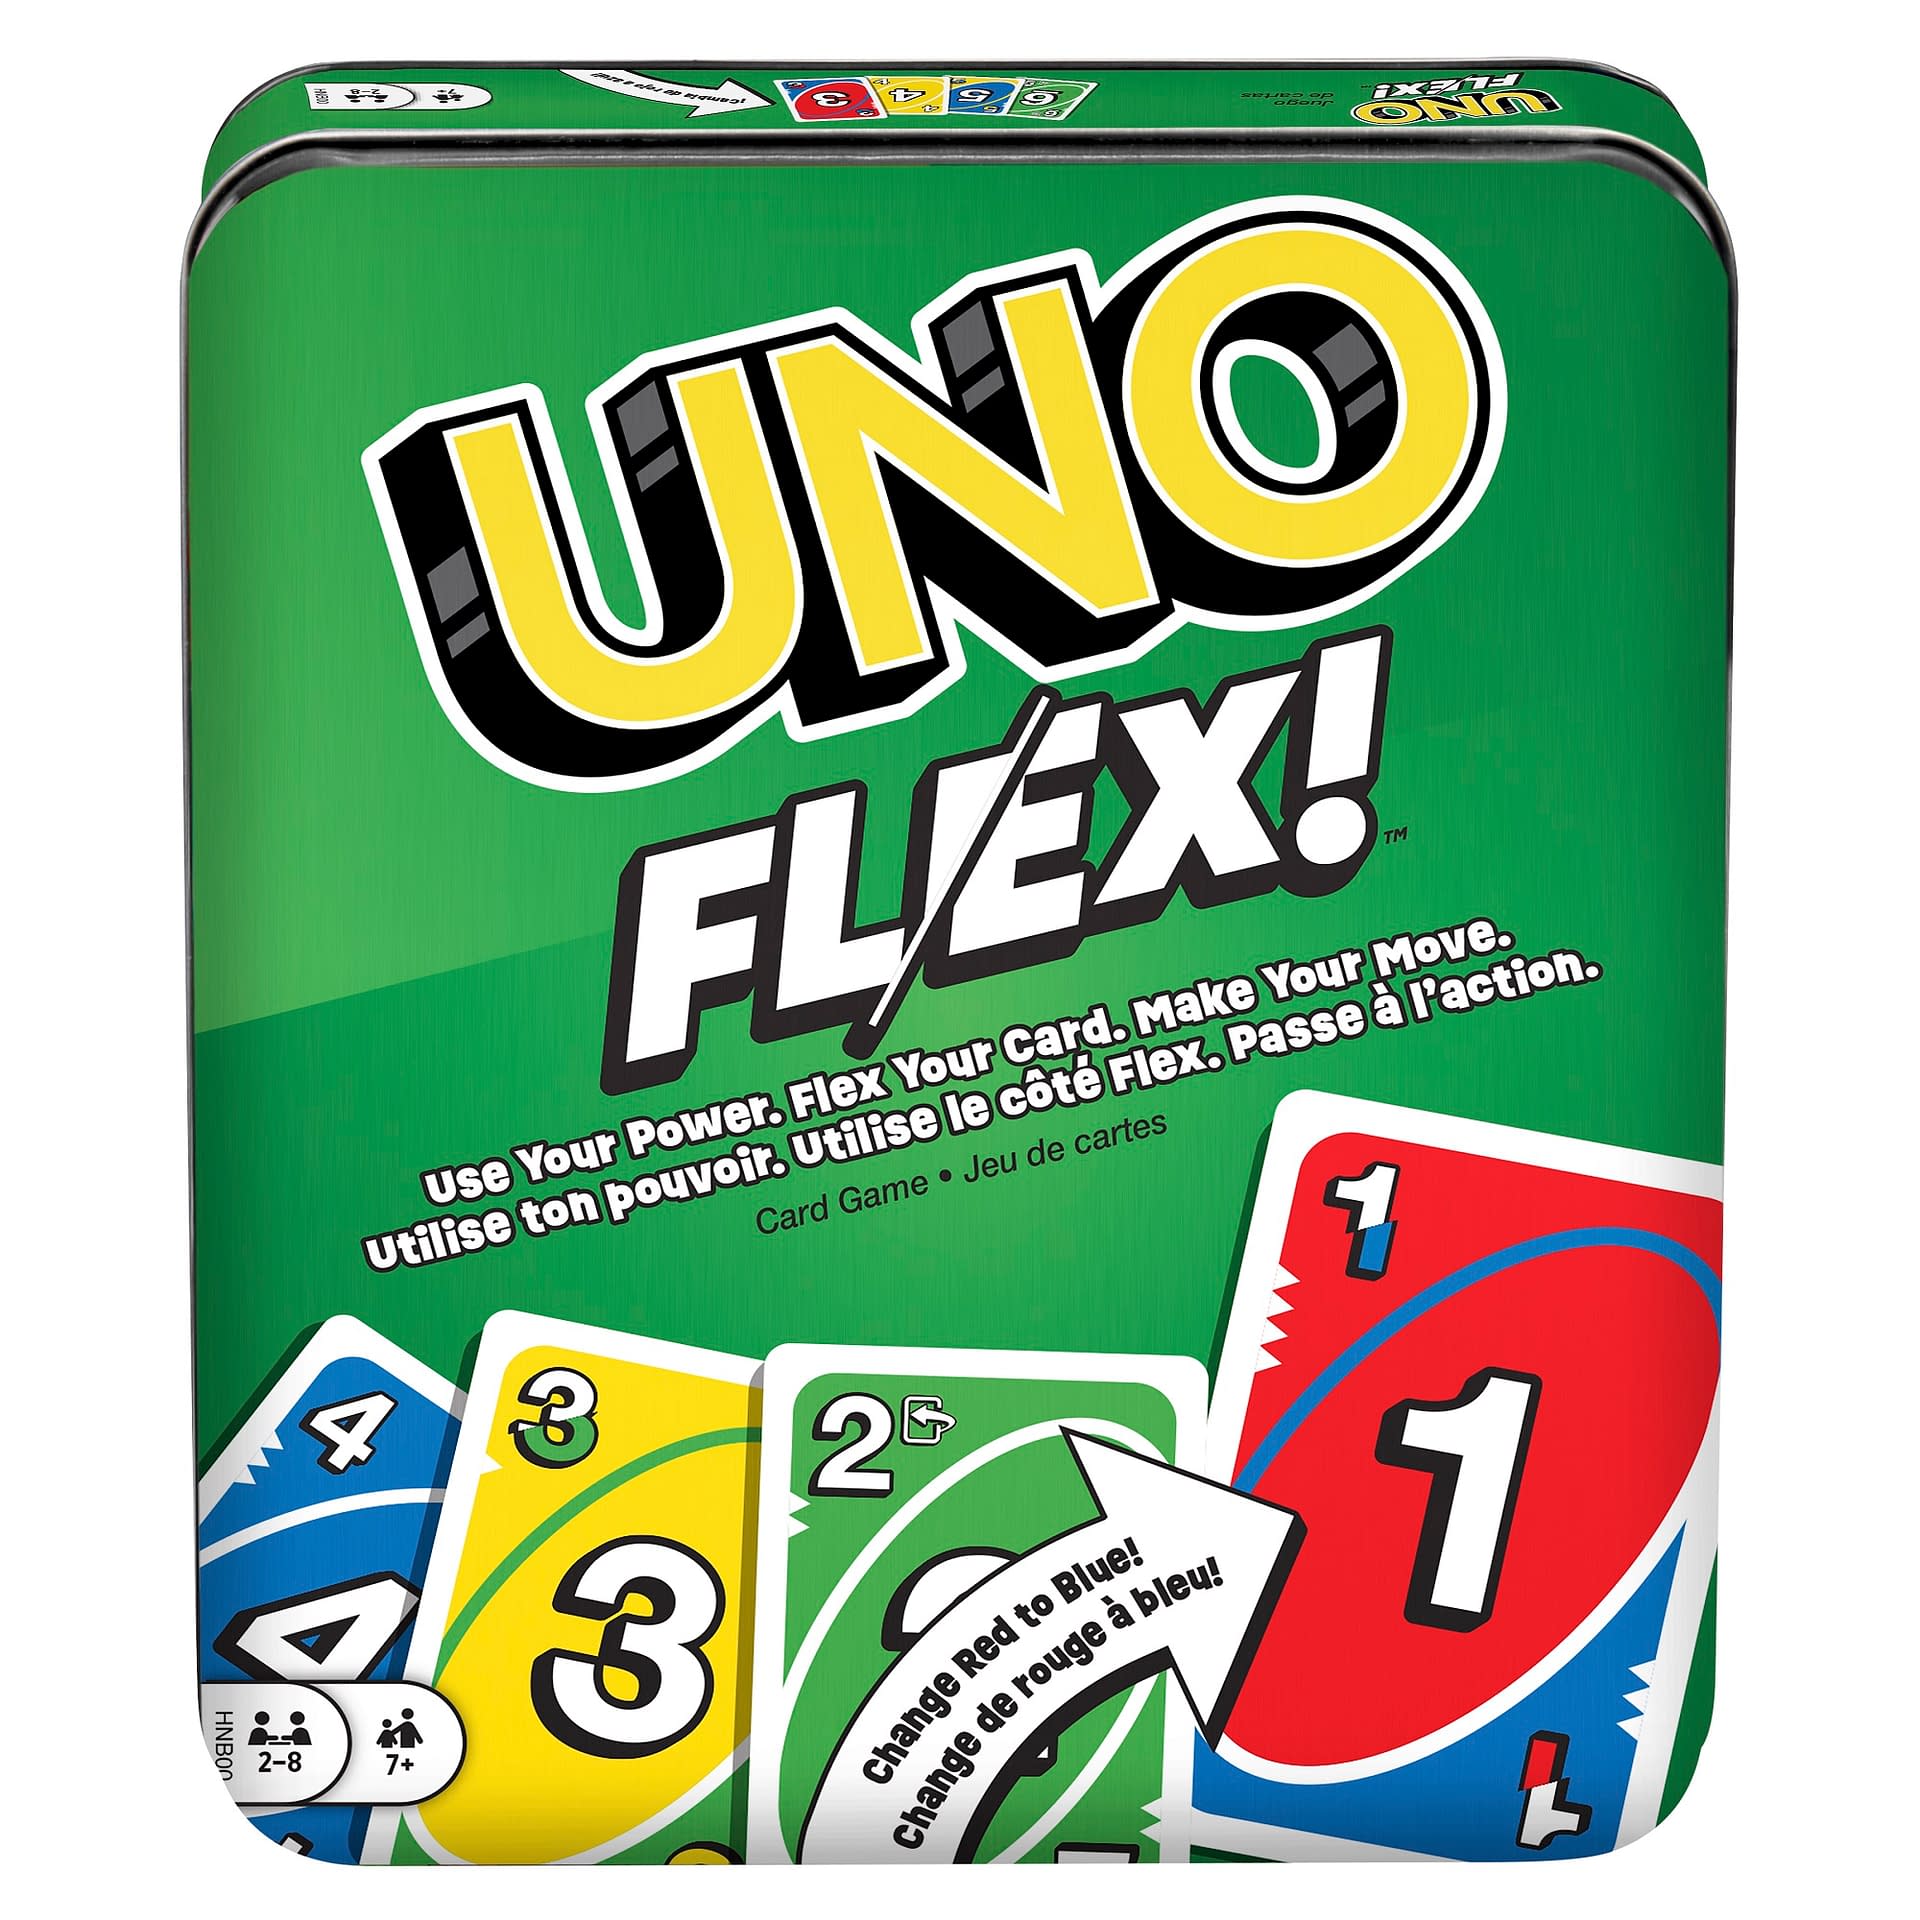 The new version of UNO launches for PC